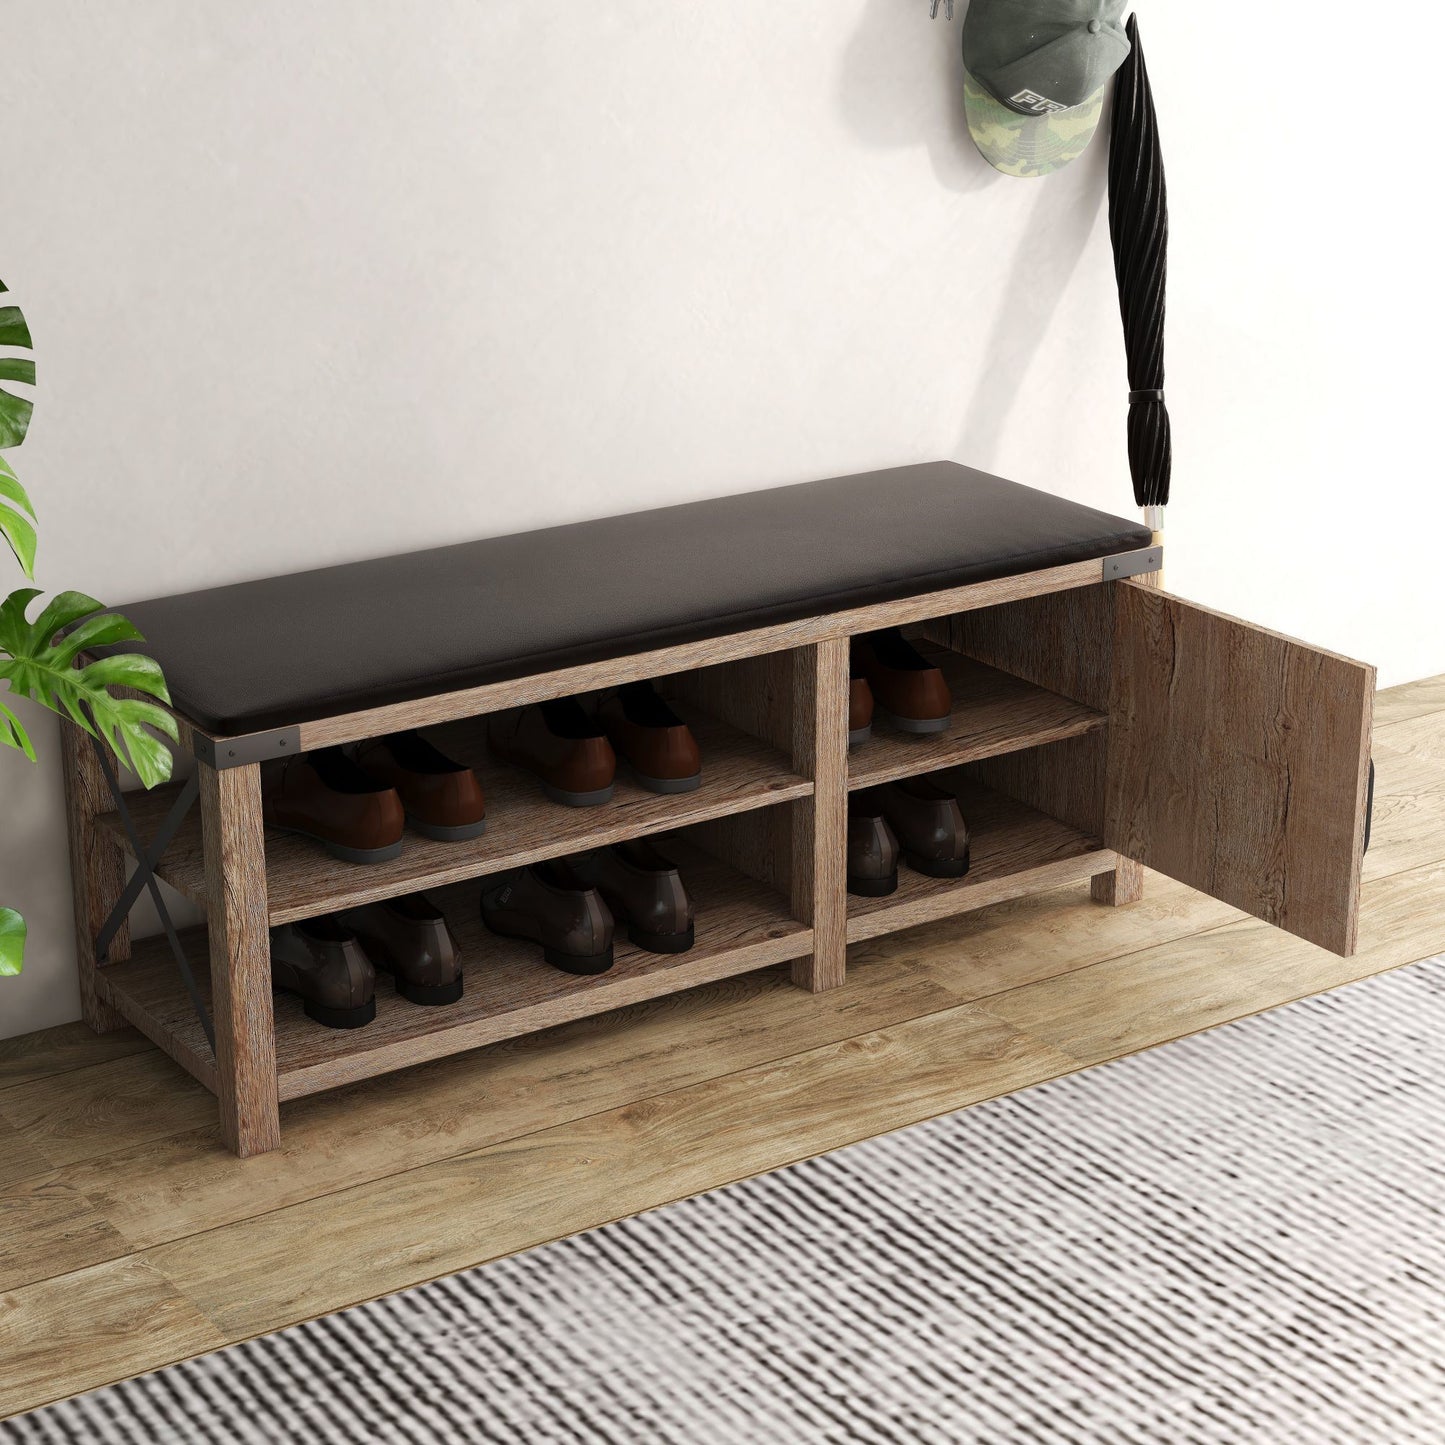 WESOME Modern Farmhouse Tobacco Wood Shoes Bench